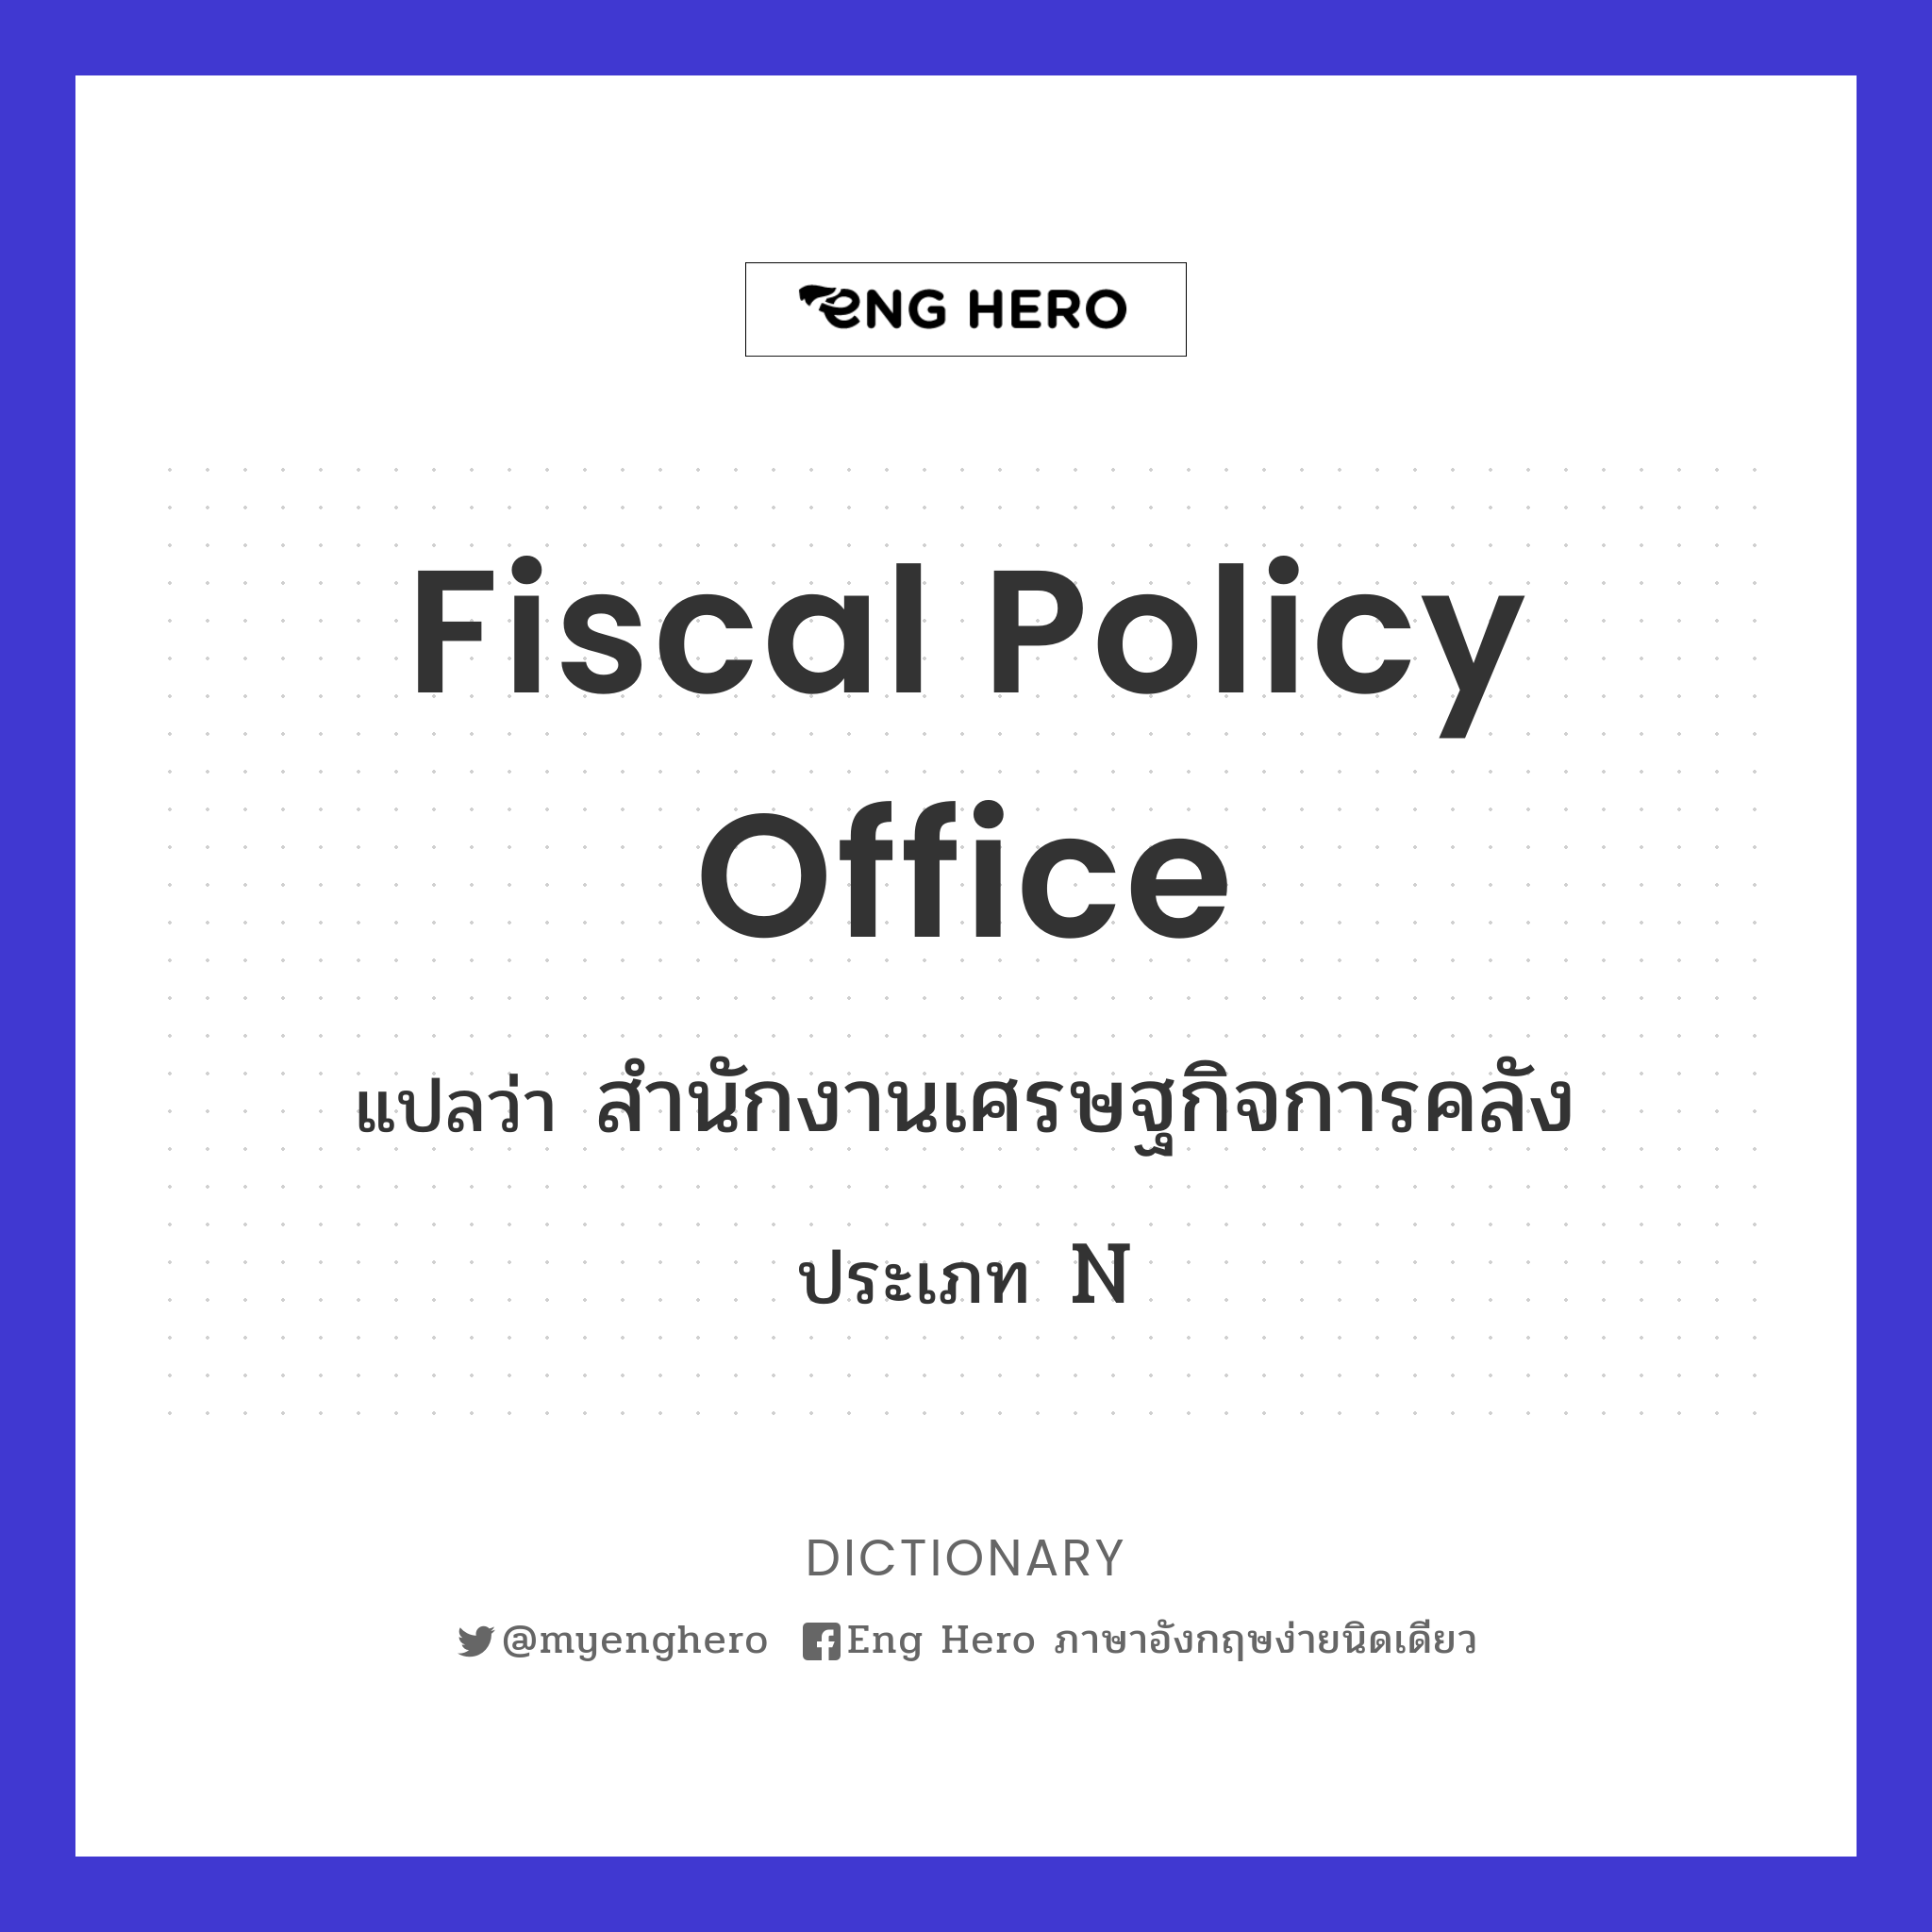 Fiscal Policy Office